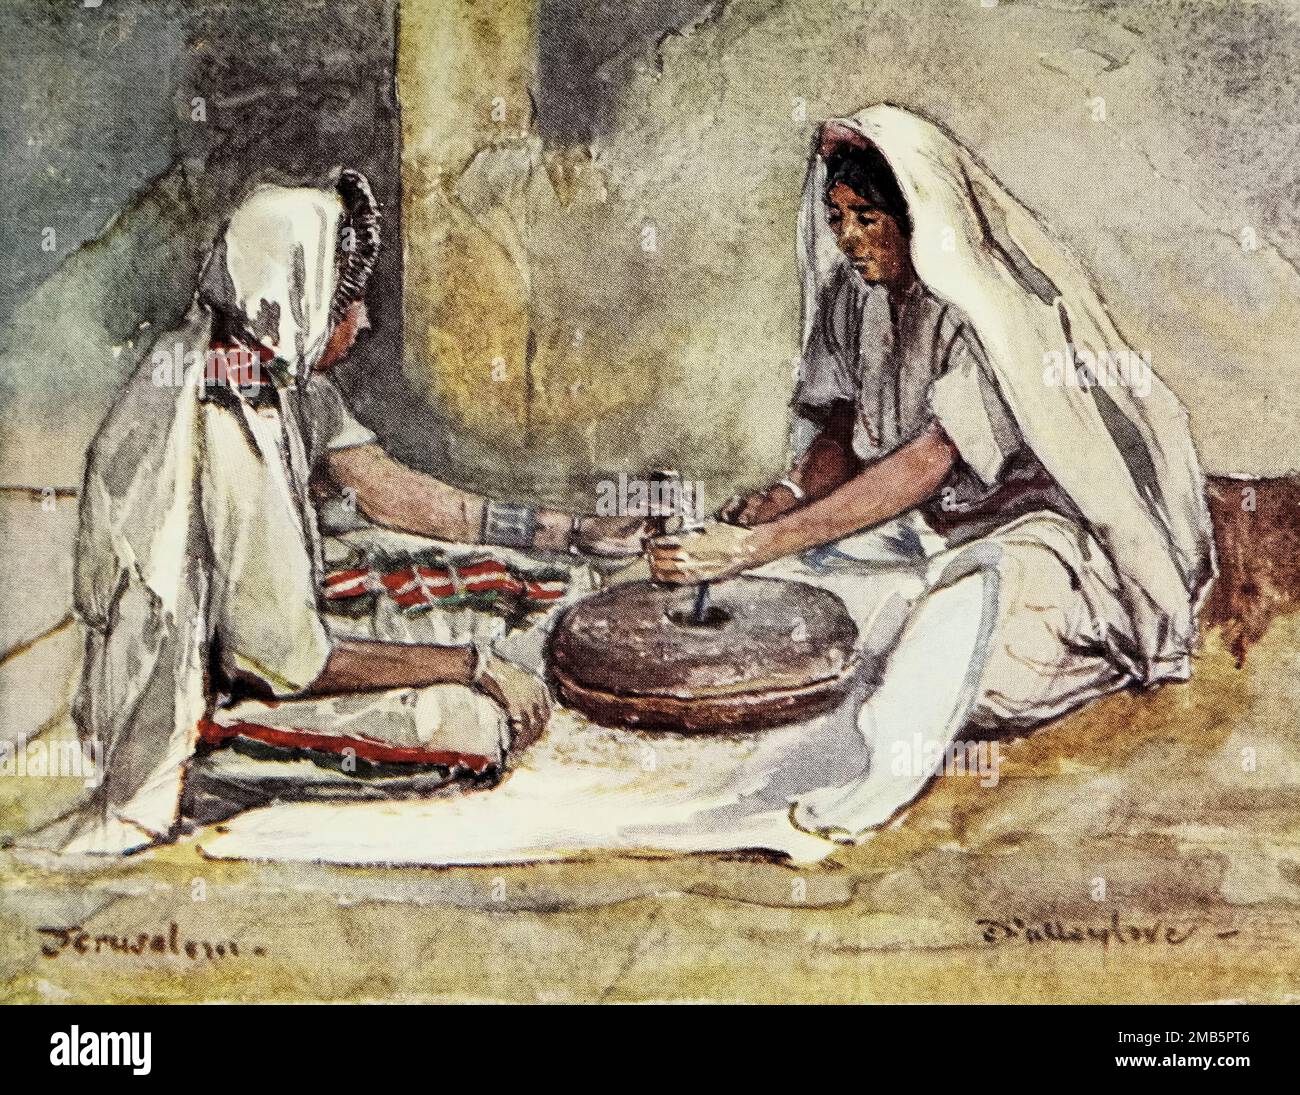 Two Women grinding at a Hand-Mill Painted by John Fulleylove from the book ' The Holy land ' Described by John Kelman 1864-1929 Publication date 1902 Publisher London : A. & C. Black Stock Photo